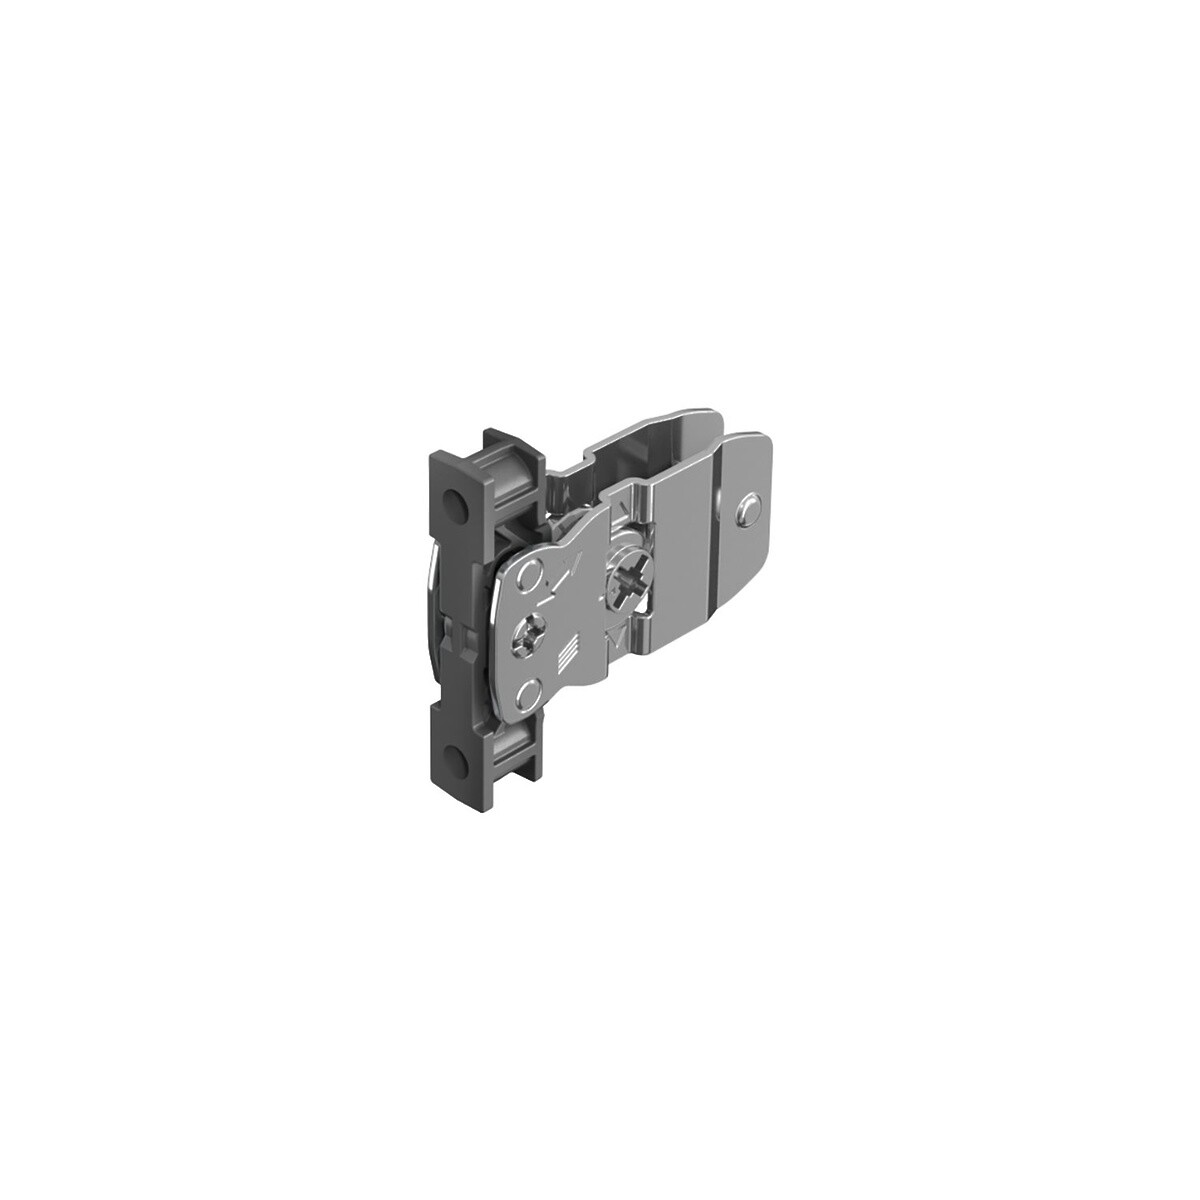 AvanTech YOU Drawer front connector for side profile, height 101 mm, screwing on